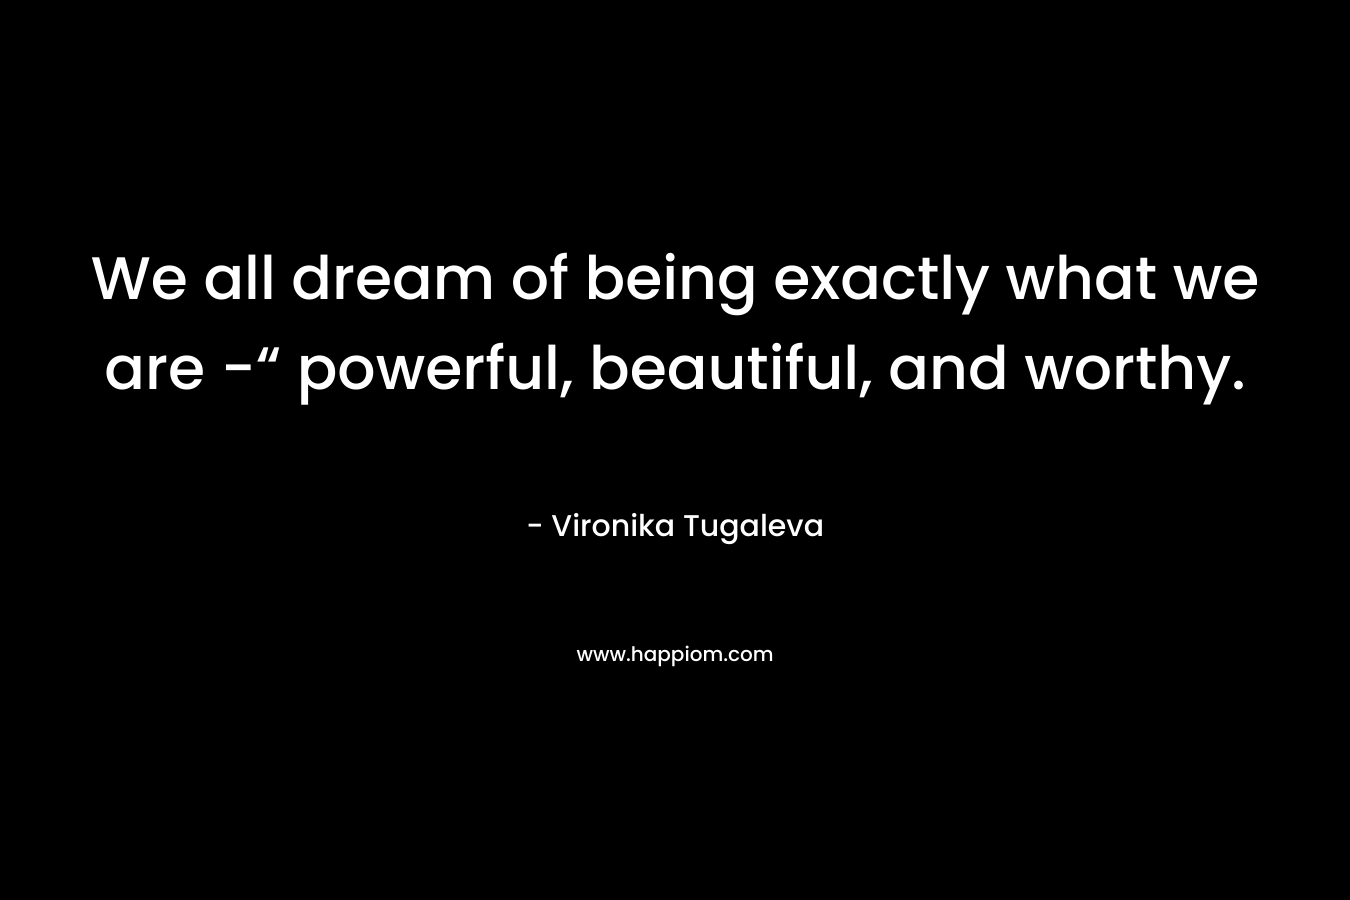 We all dream of being exactly what we are -“ powerful, beautiful, and worthy.